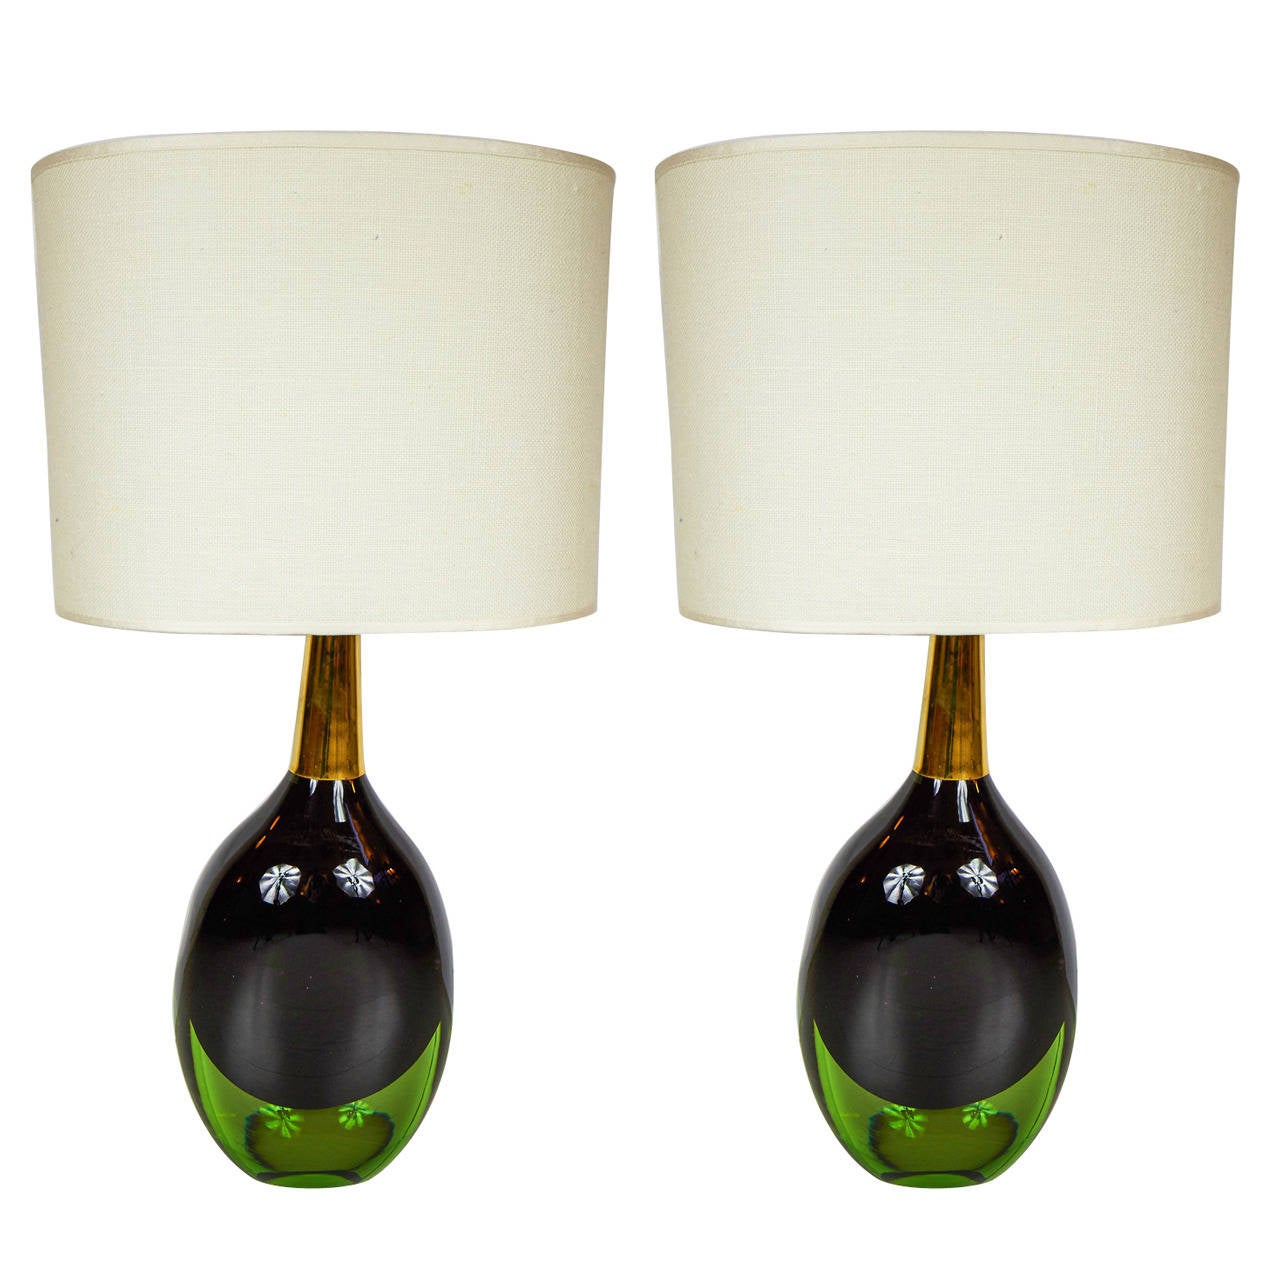 Pair of Seguso "Sommerso" Murano Glass Signed Table Lamps, 1950s